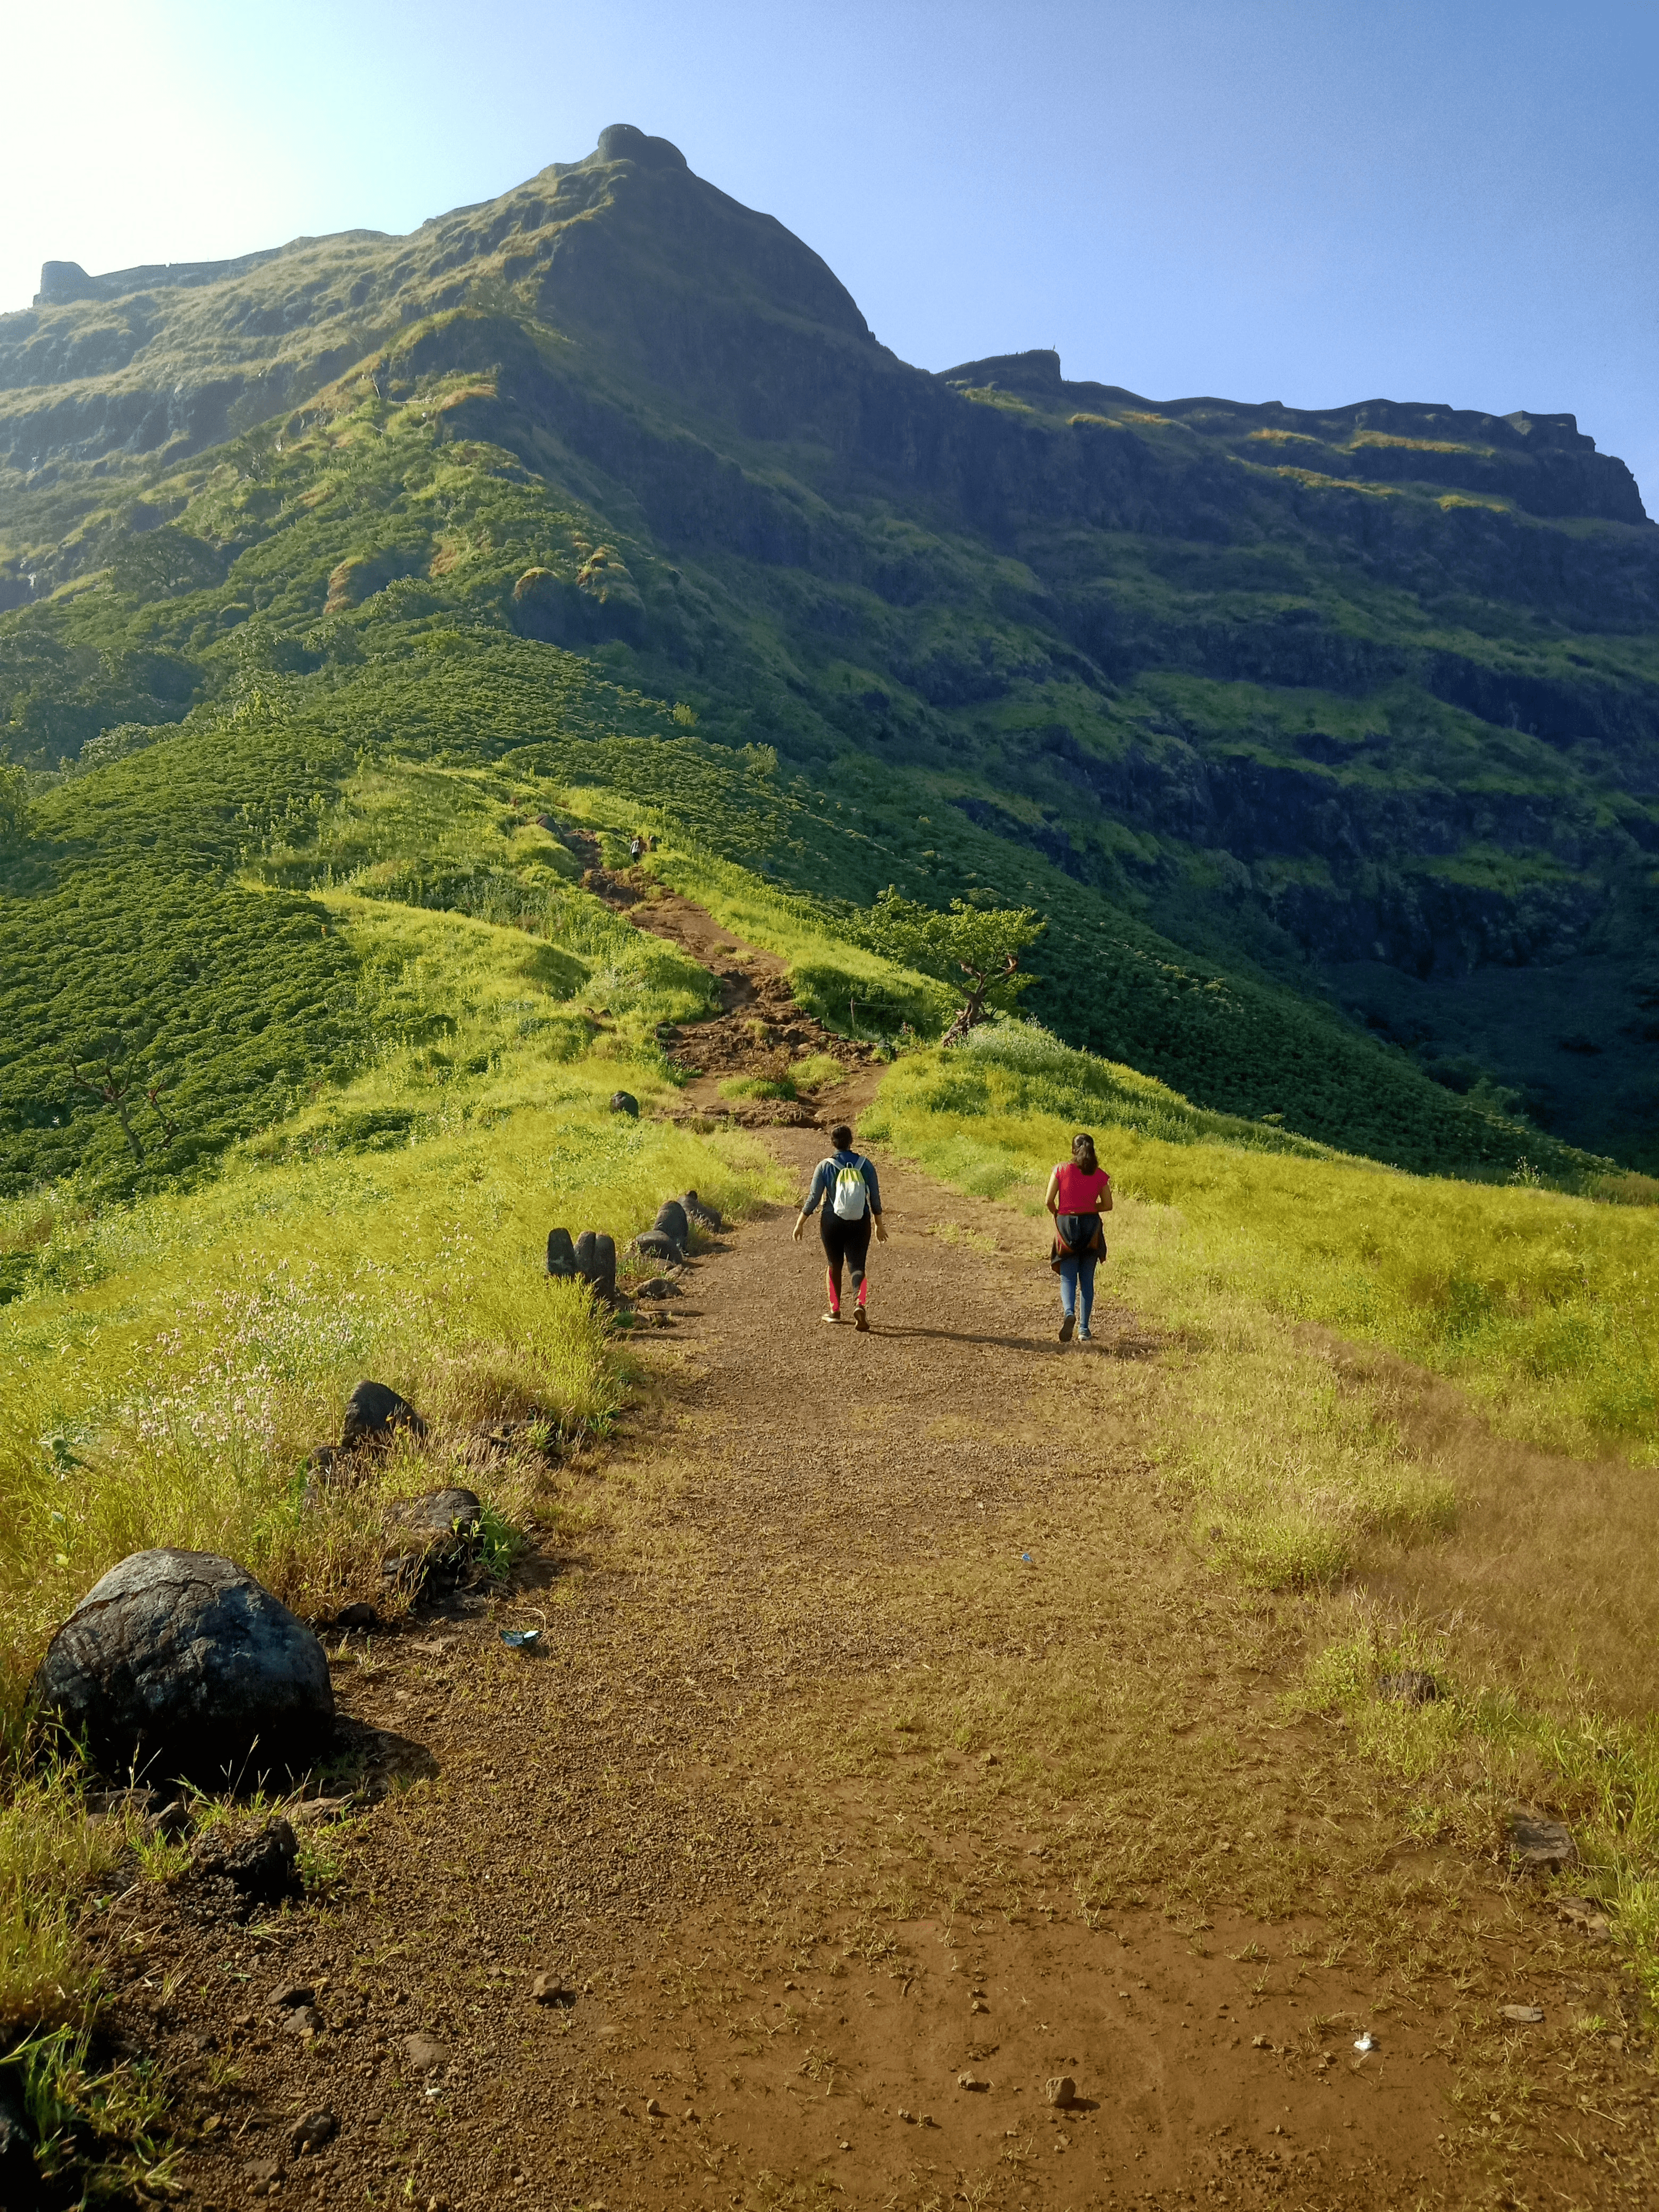 weekend getaway - trekking up a hill halfway point two persons in Igatpuri